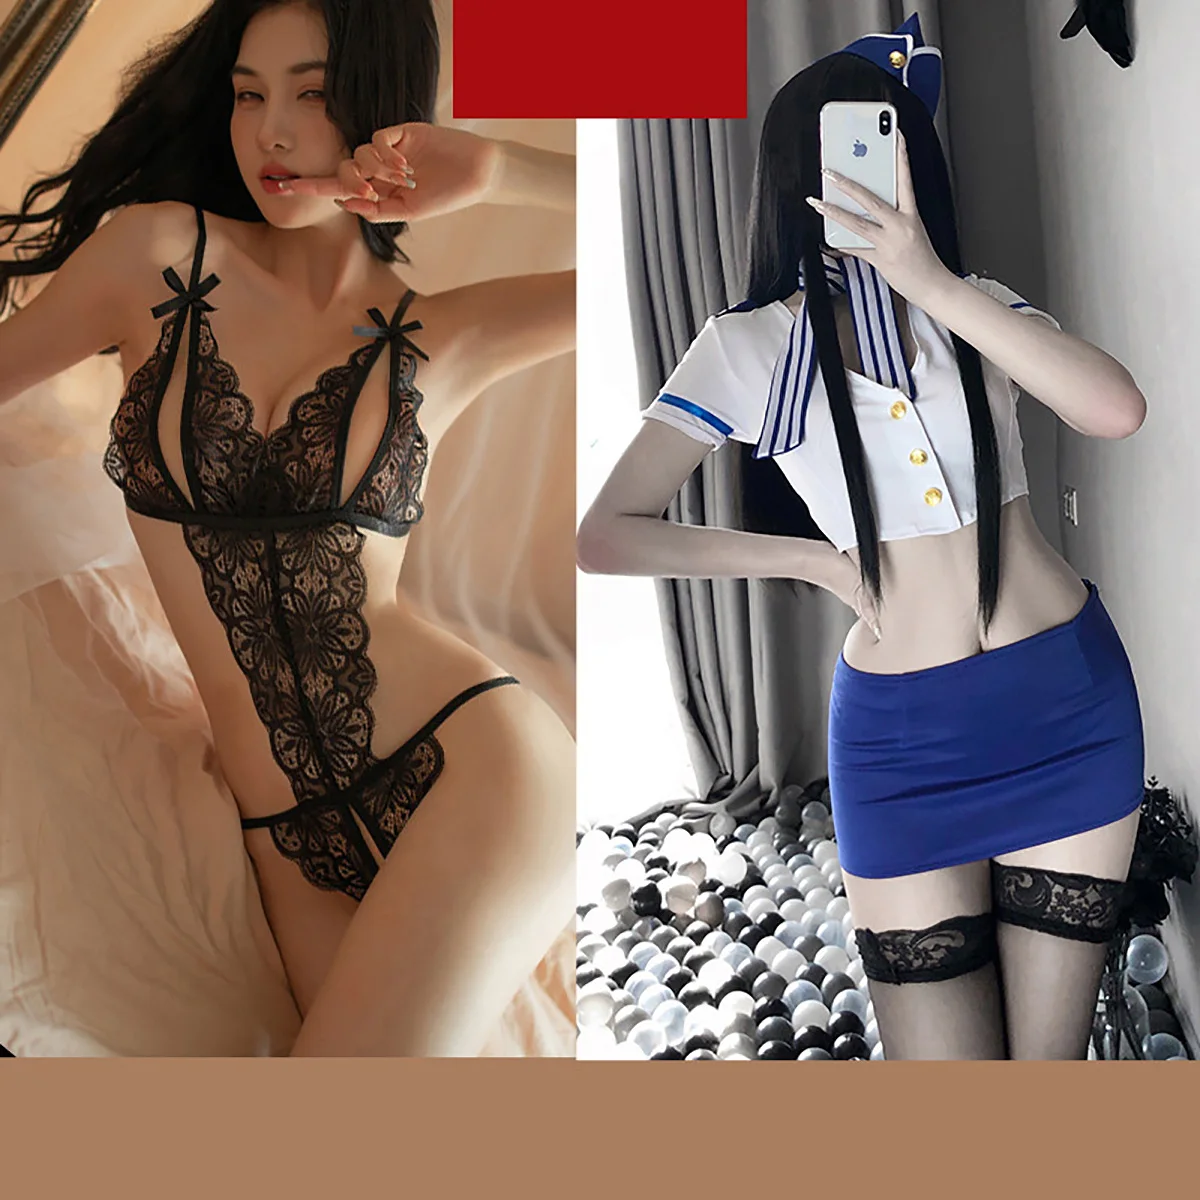 

Sexy Lingerie Set for Women Maid Secretary Student Uniform Cosplay Nightdress Erotic Lingerie Porno Lace Cutout Underwear Thong